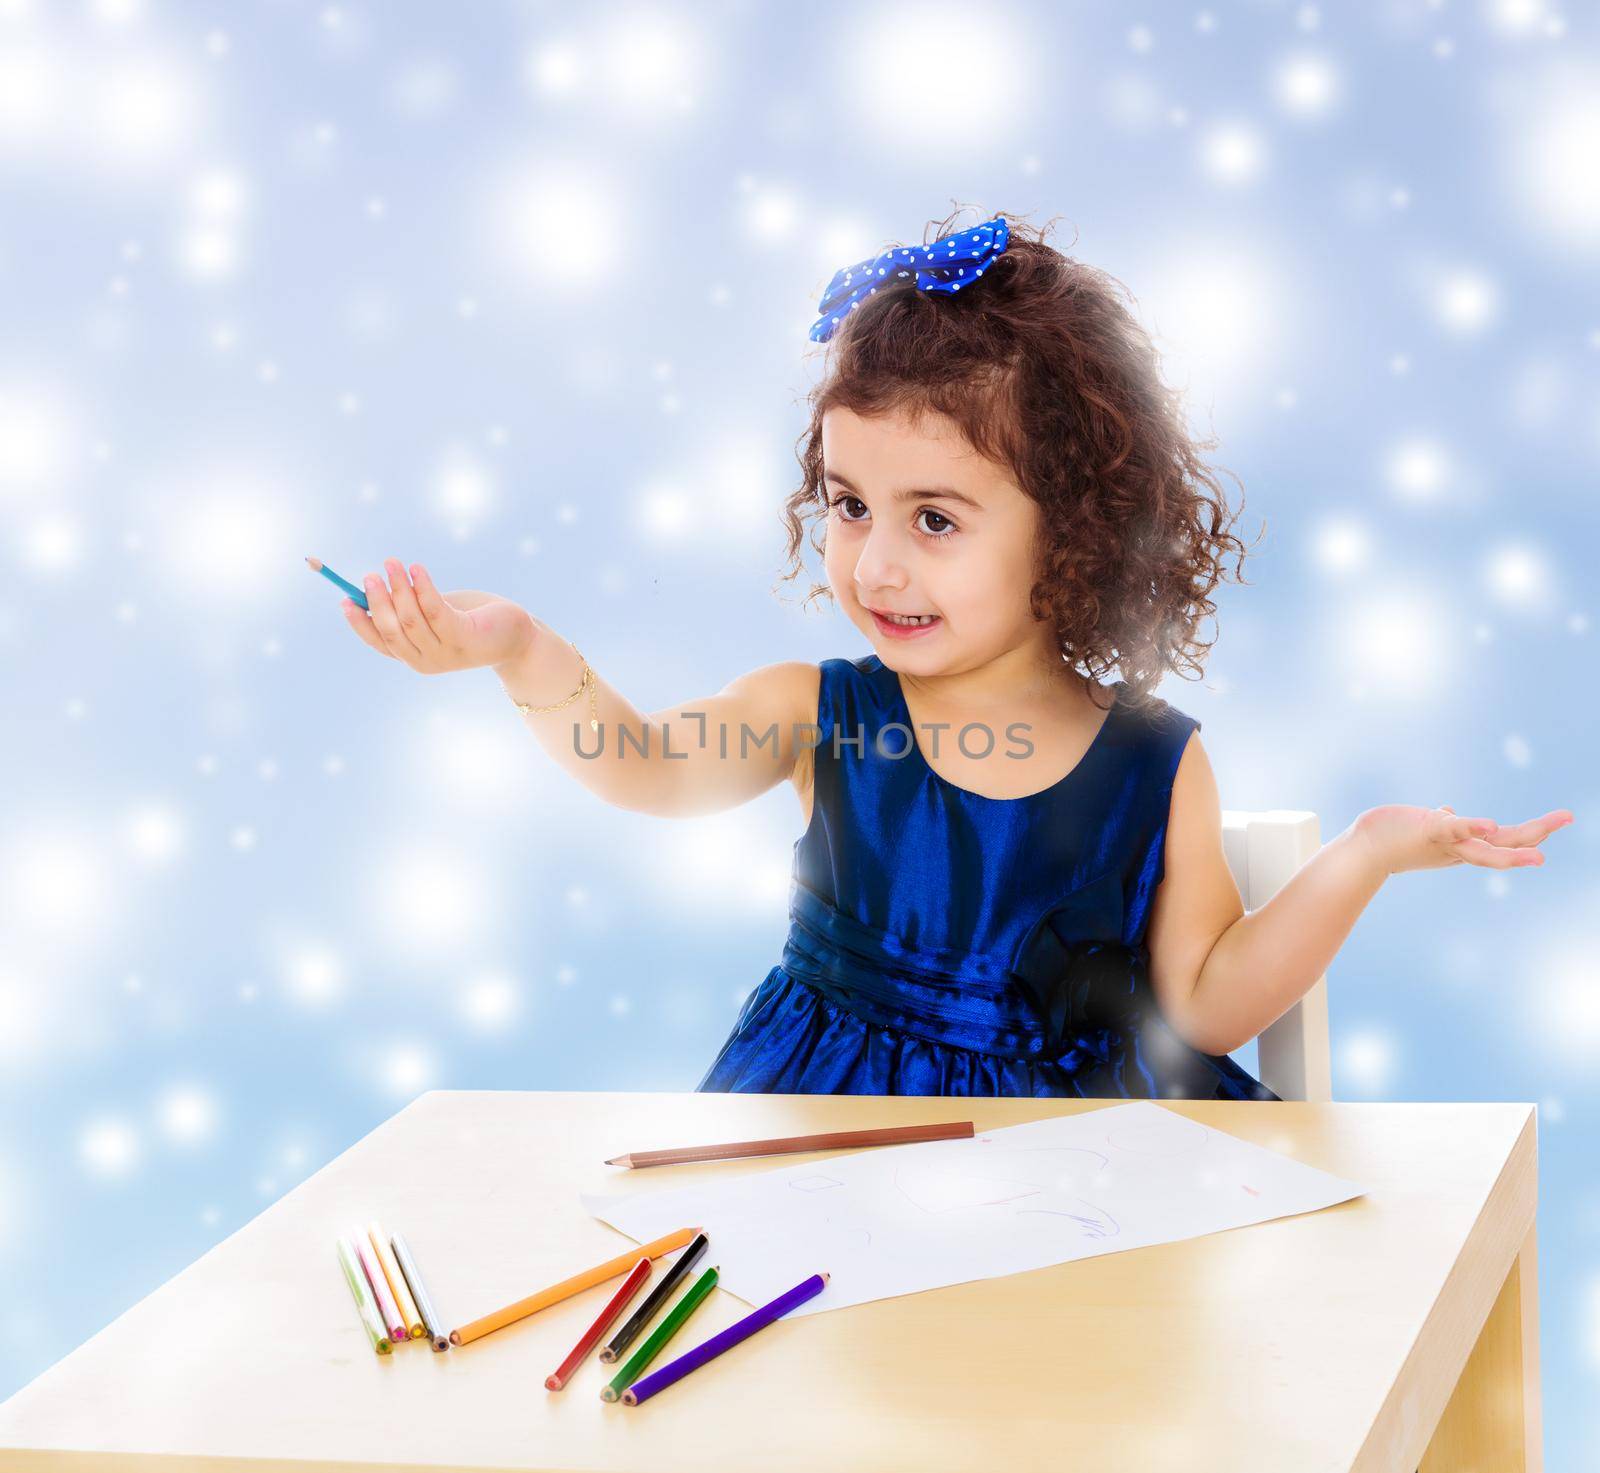 Adorable little girl in a blue dress drawing pencils . Girl sitting at the table.Blue winter background with white snowflakes.